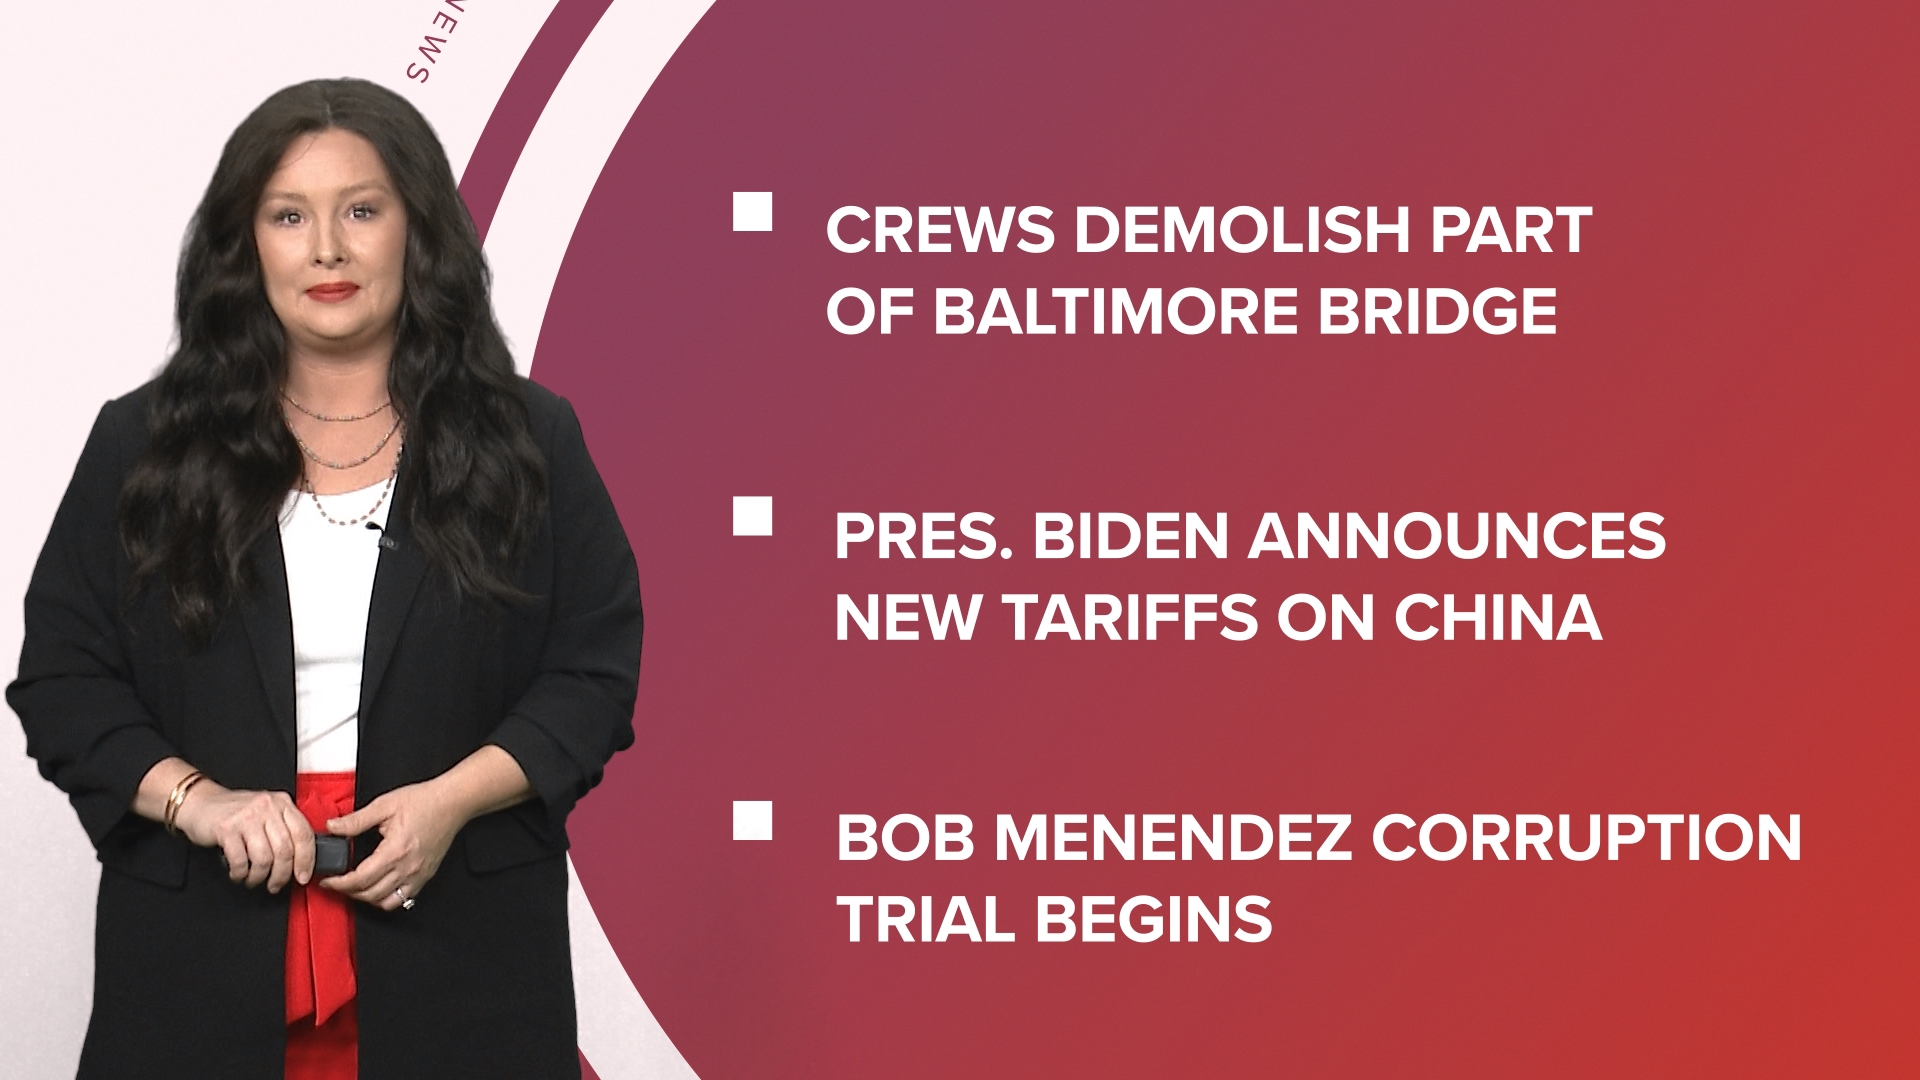 A look at what is happening in the news from an update on cleanup of the Baltimore bridge collapse to new tariffs on Chinese EVs and Disney Parks updates.